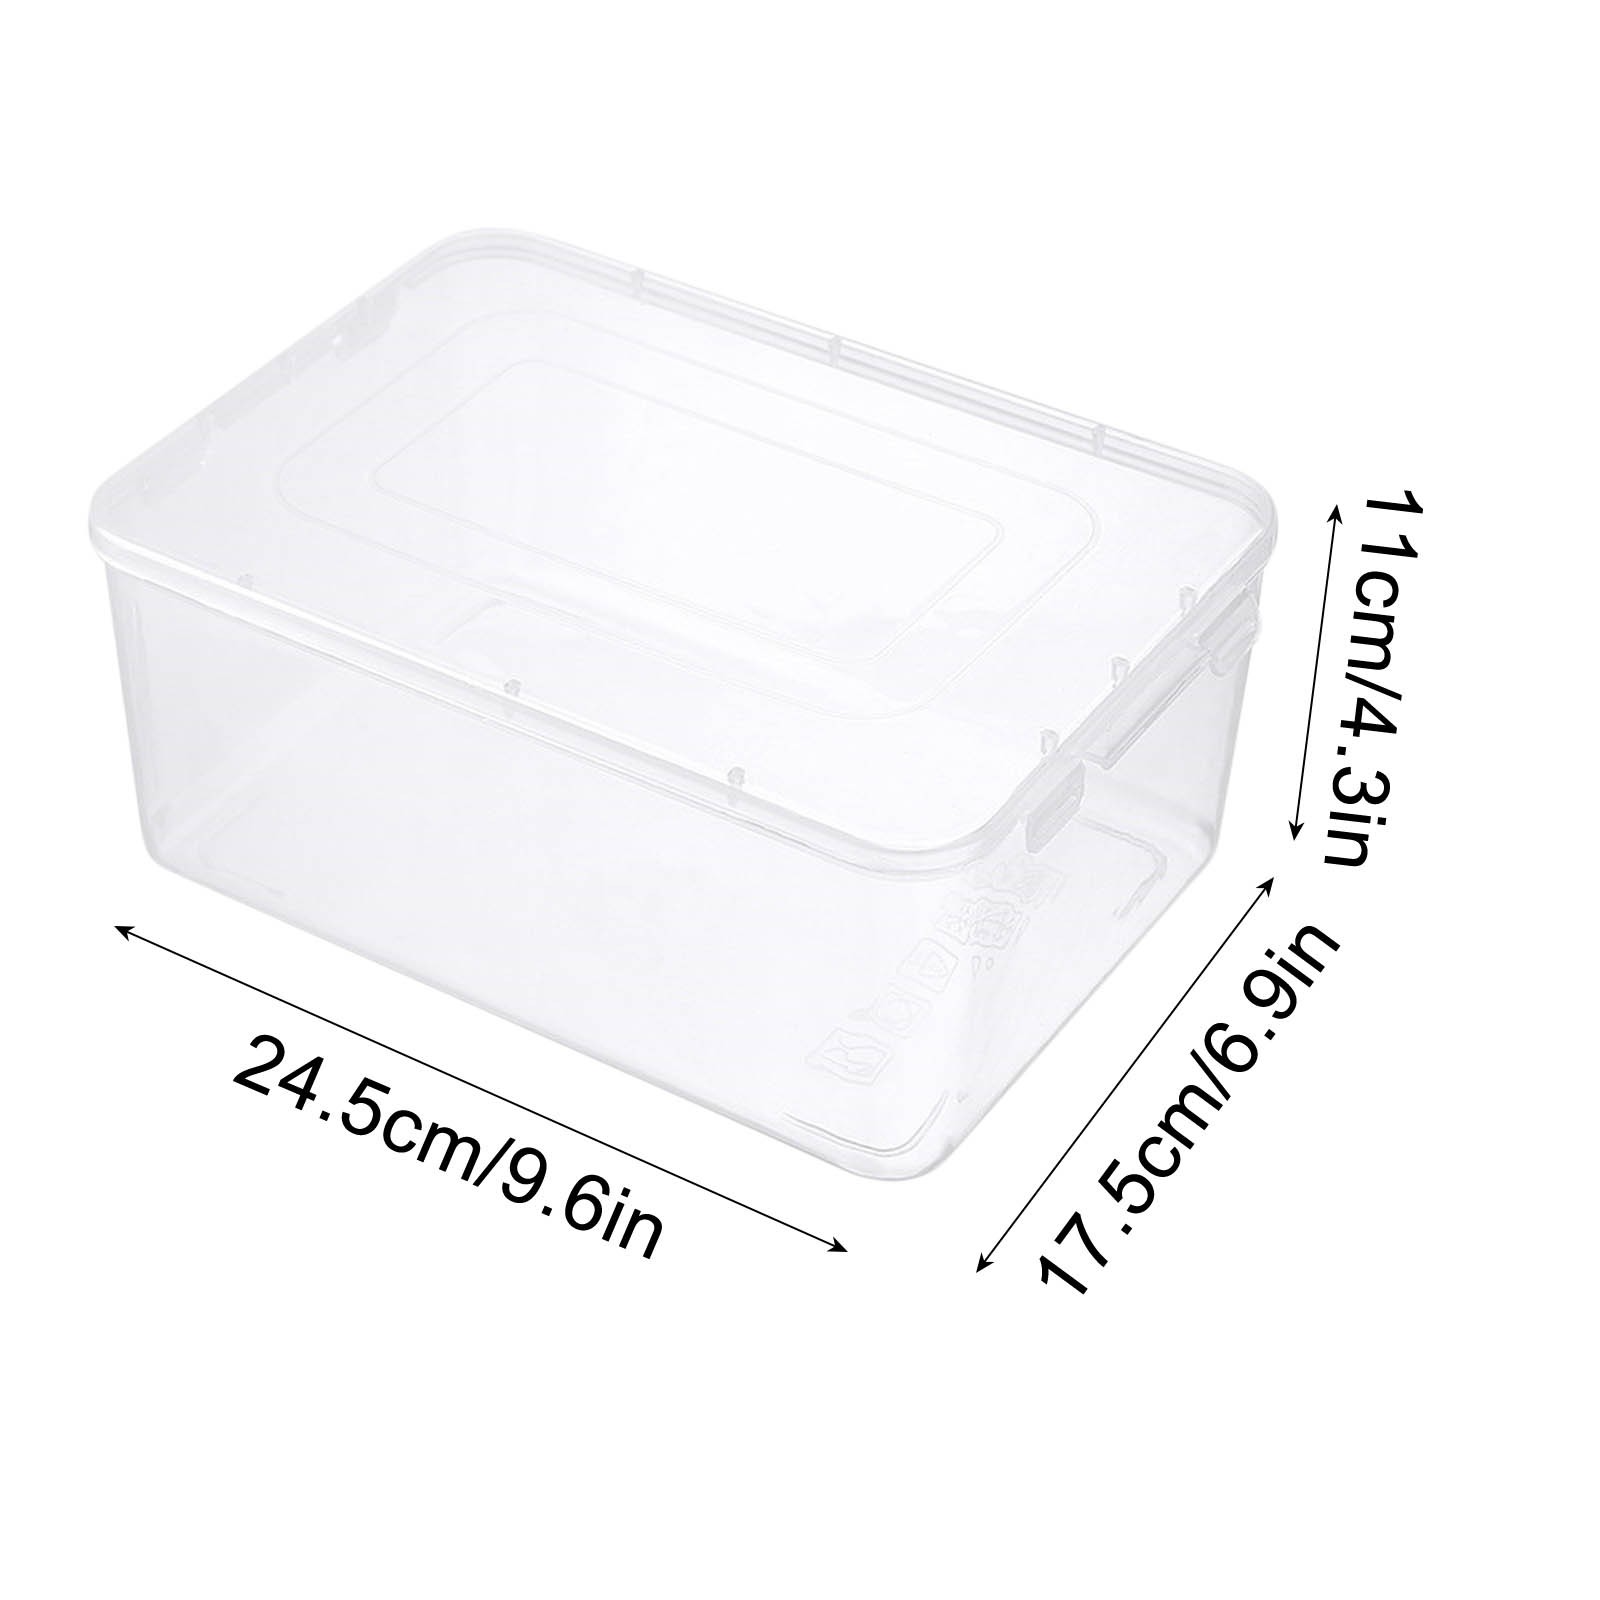 Transparent Book Storage Box Sorting And Packaging Book Shelf Storage Box Desktop Children's Picture Book Storage Box Clear - image 1 of 3